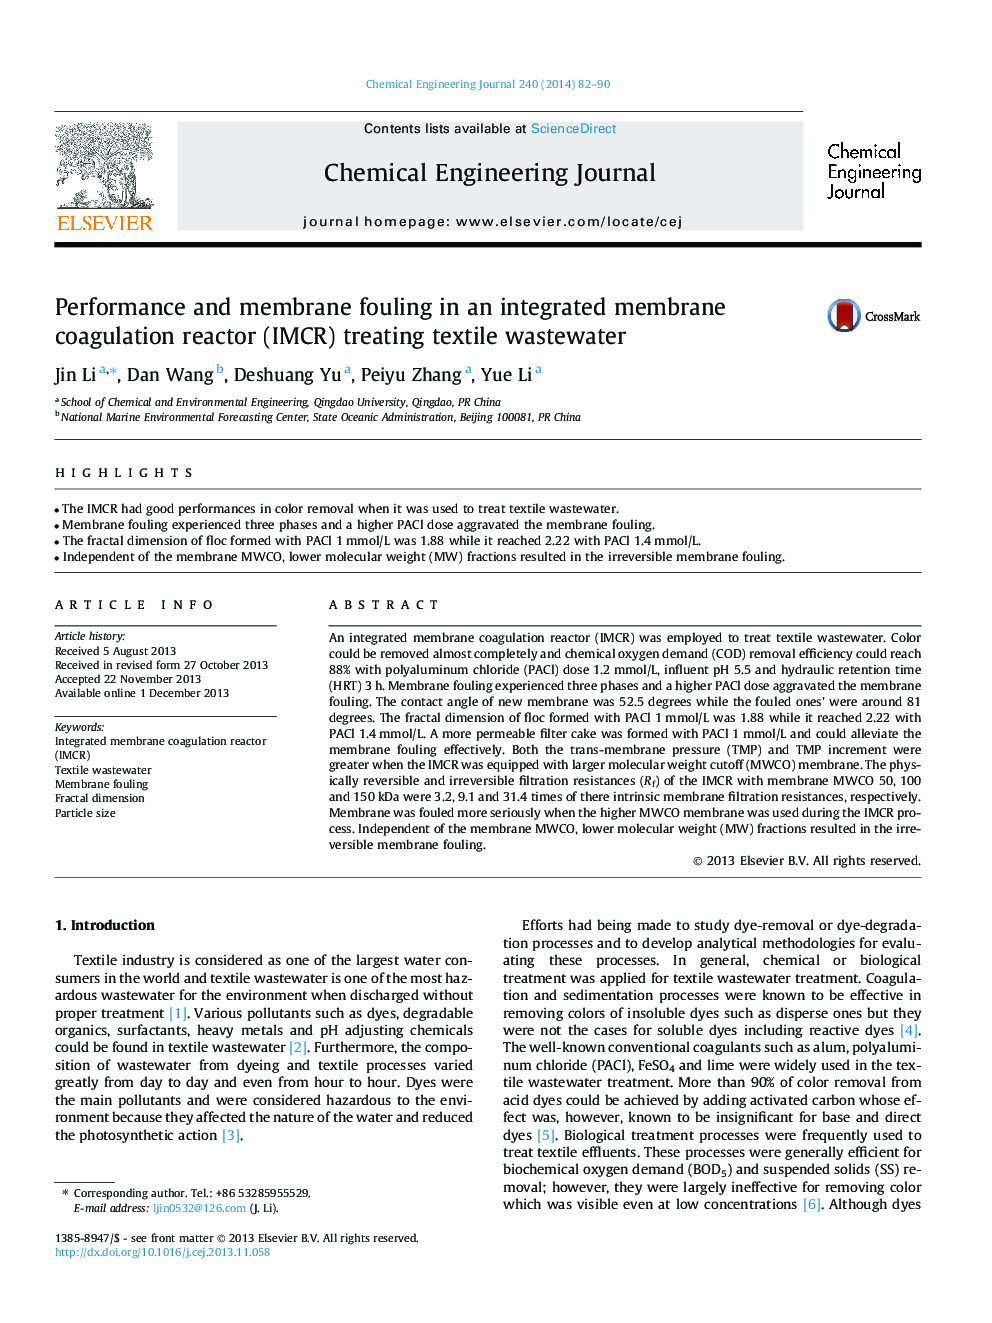 Performance and membrane fouling in an integrated membrane coagulation reactor (IMCR) treating textile wastewater